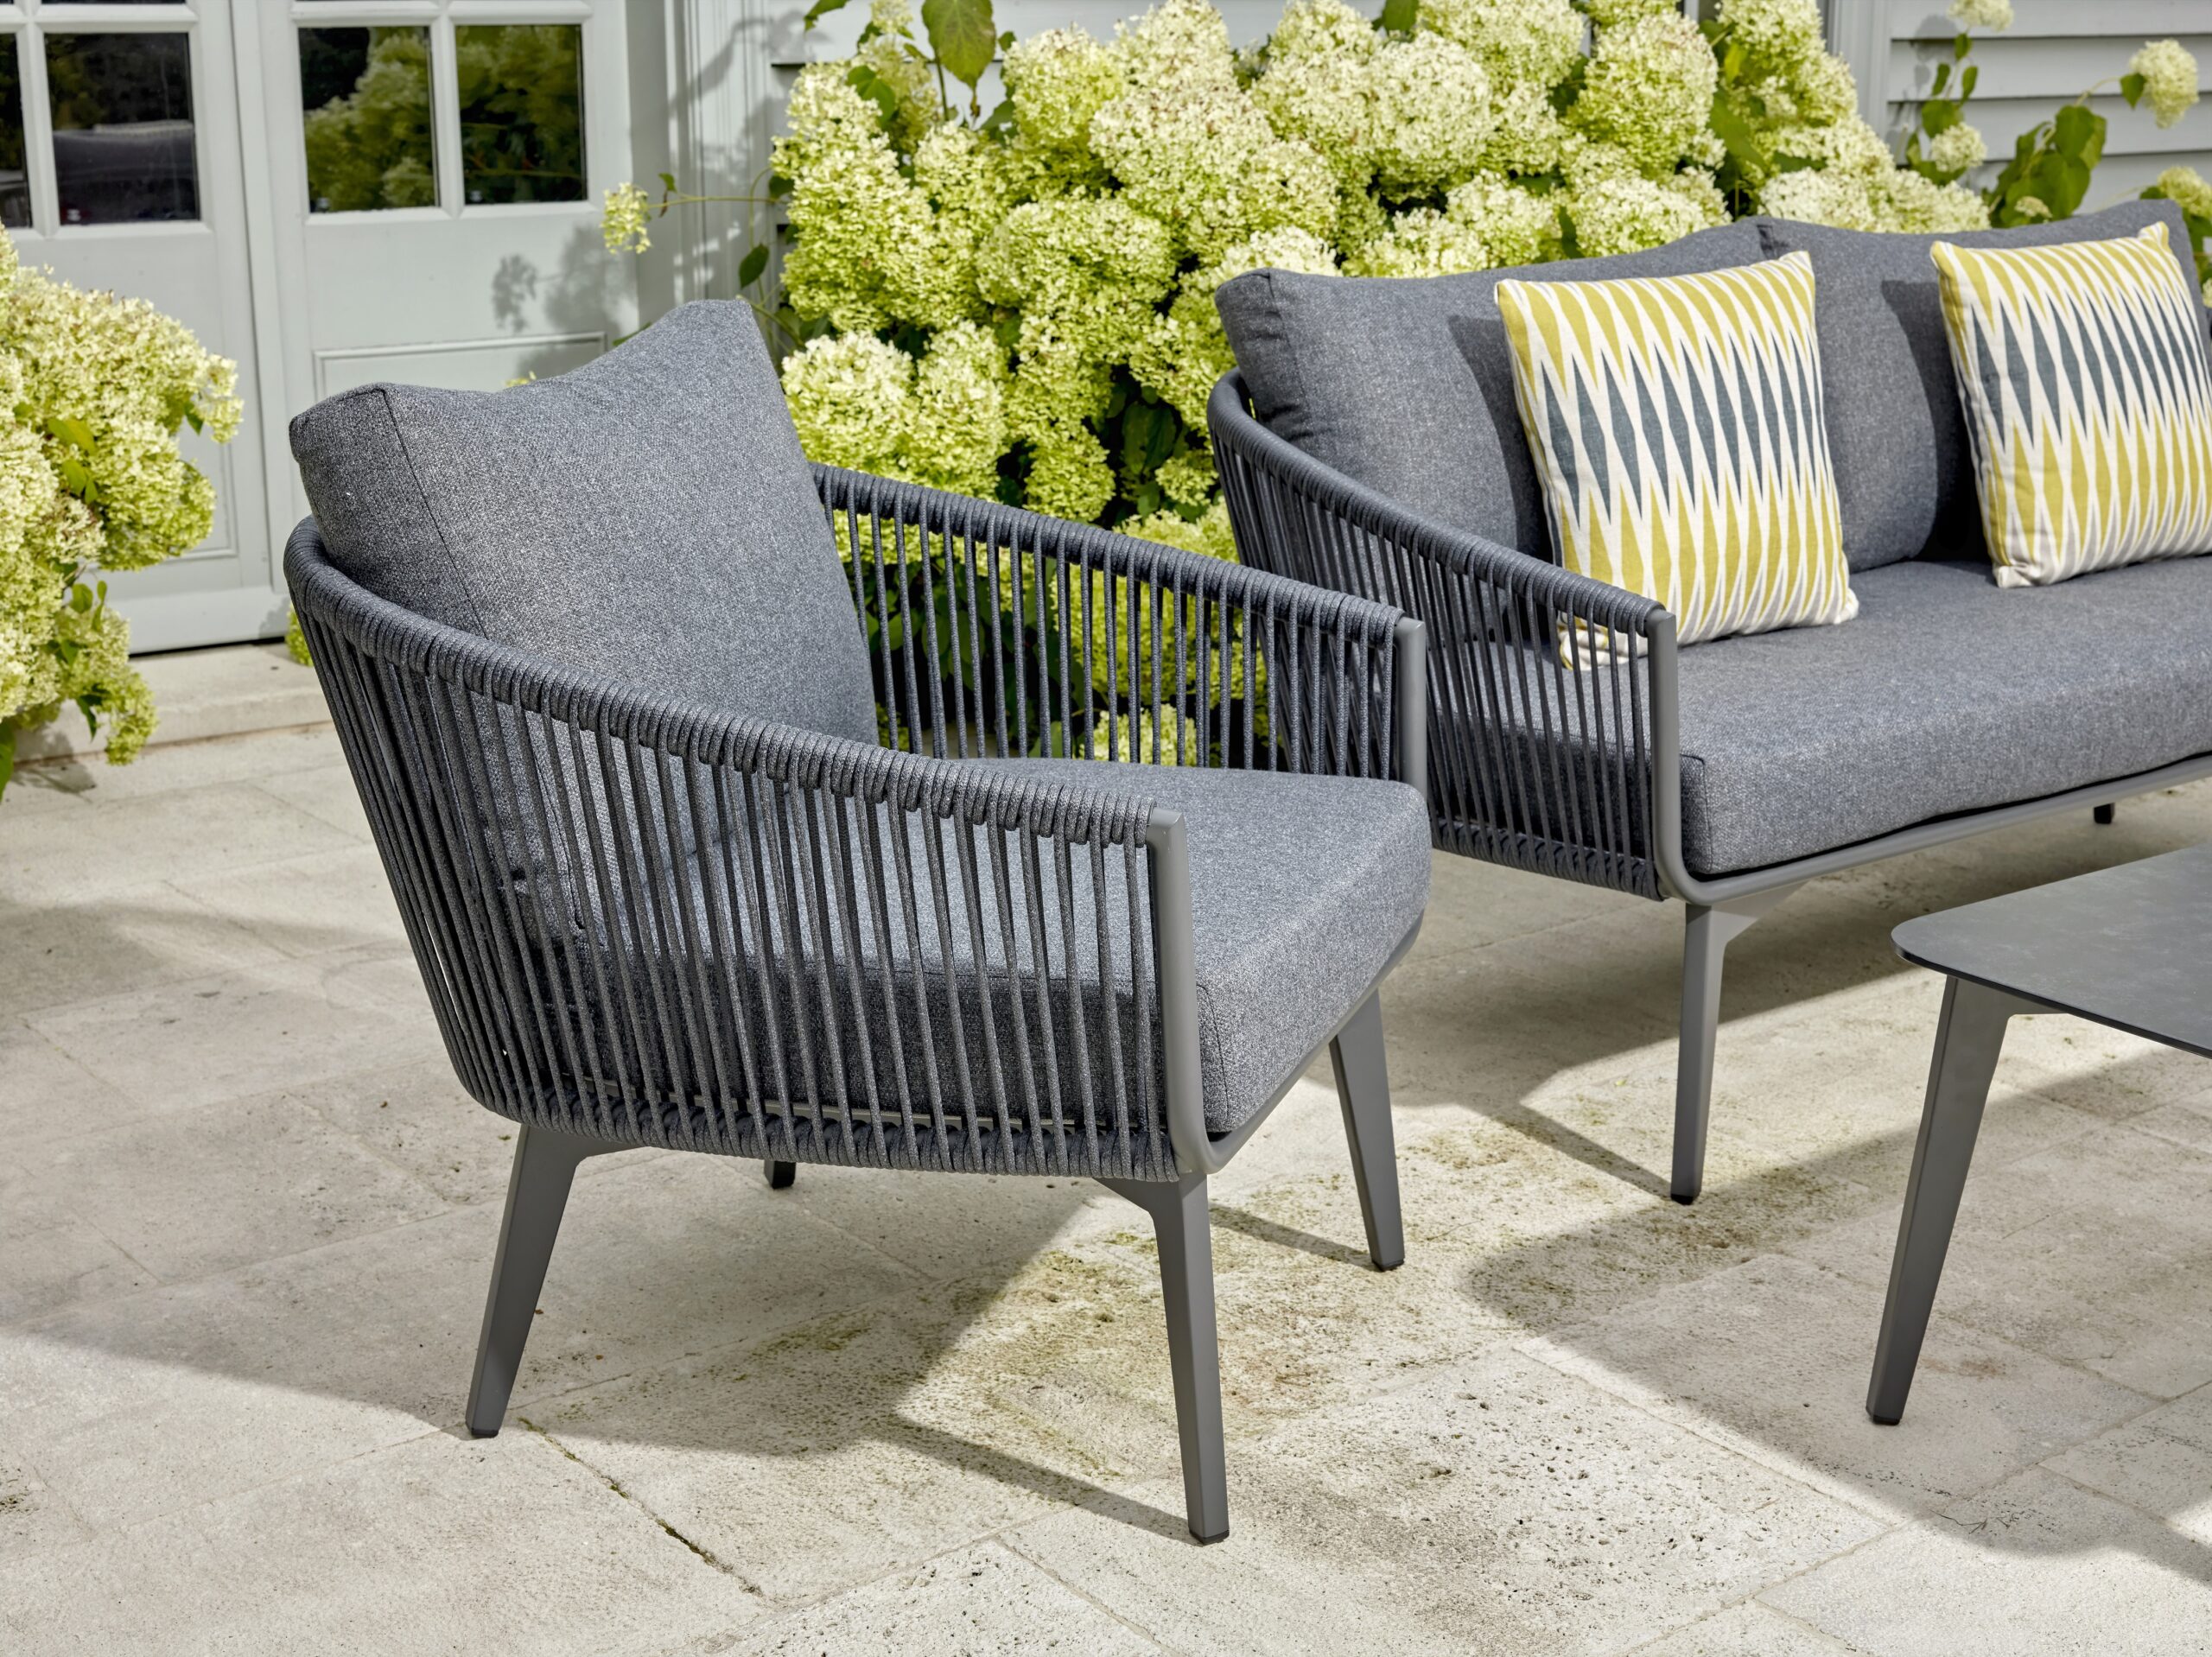 Synthetic Rope Effect Garden Furniture